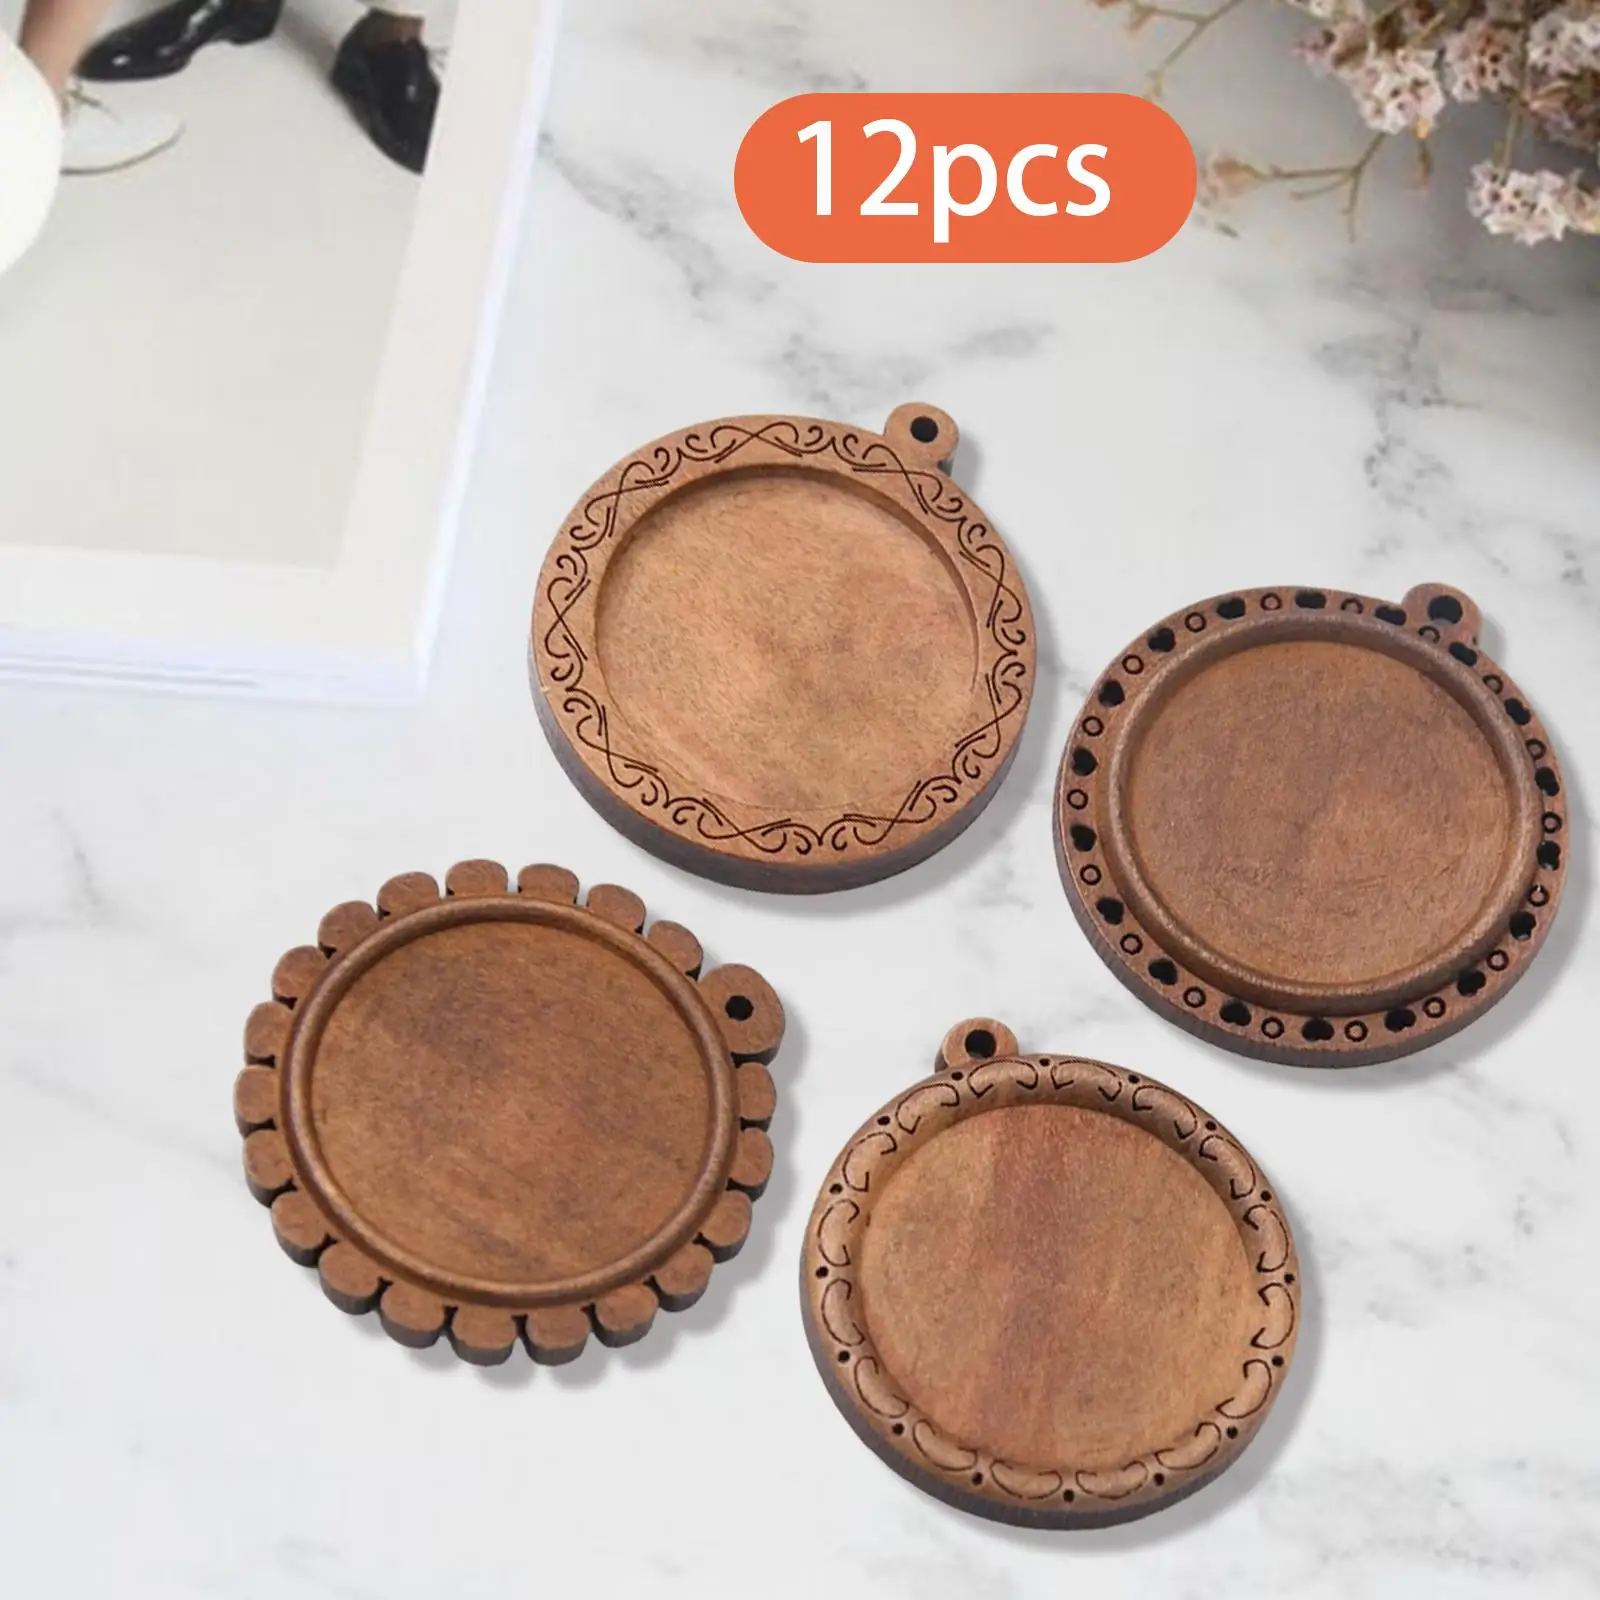 12 Pieces Pendant Trays Wooden Handmade 30mm Charms Cabochaon Trays for Decoration Necklace Jewelry Making DIY Crafting Photo